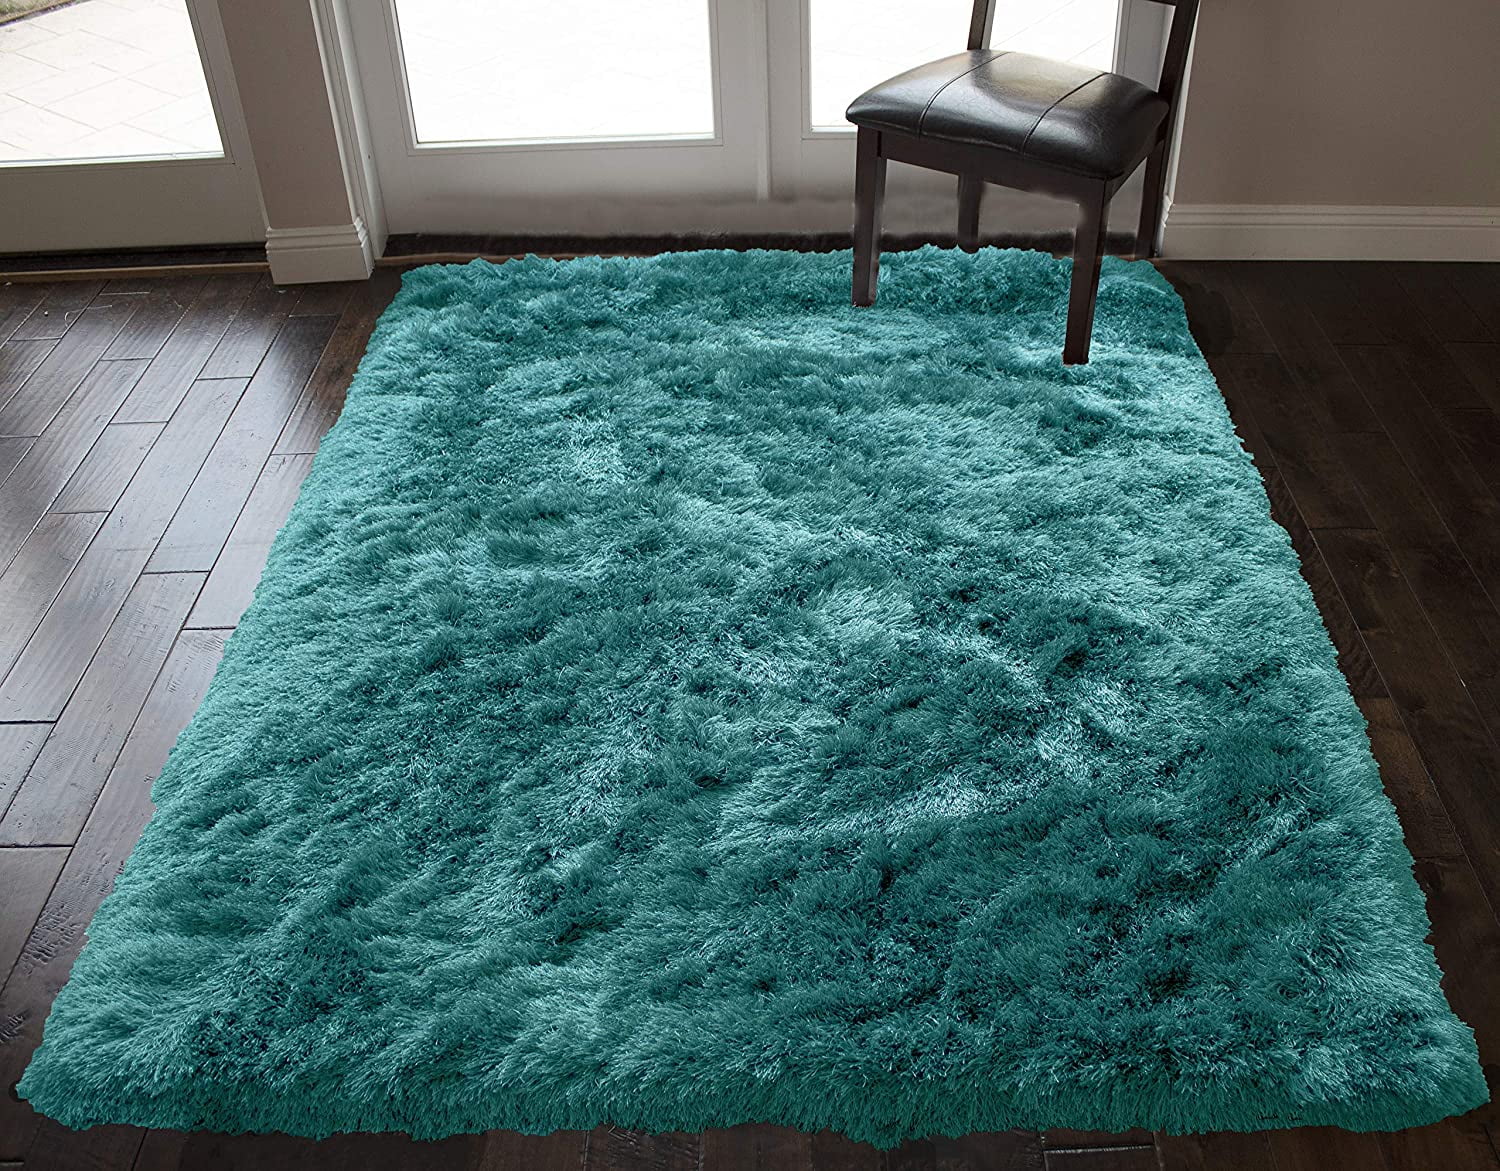 Cosy Thick Soft Blue Shaggy Rug Fluffy Duck Egg Teal Non Shed Living Room Rugs 